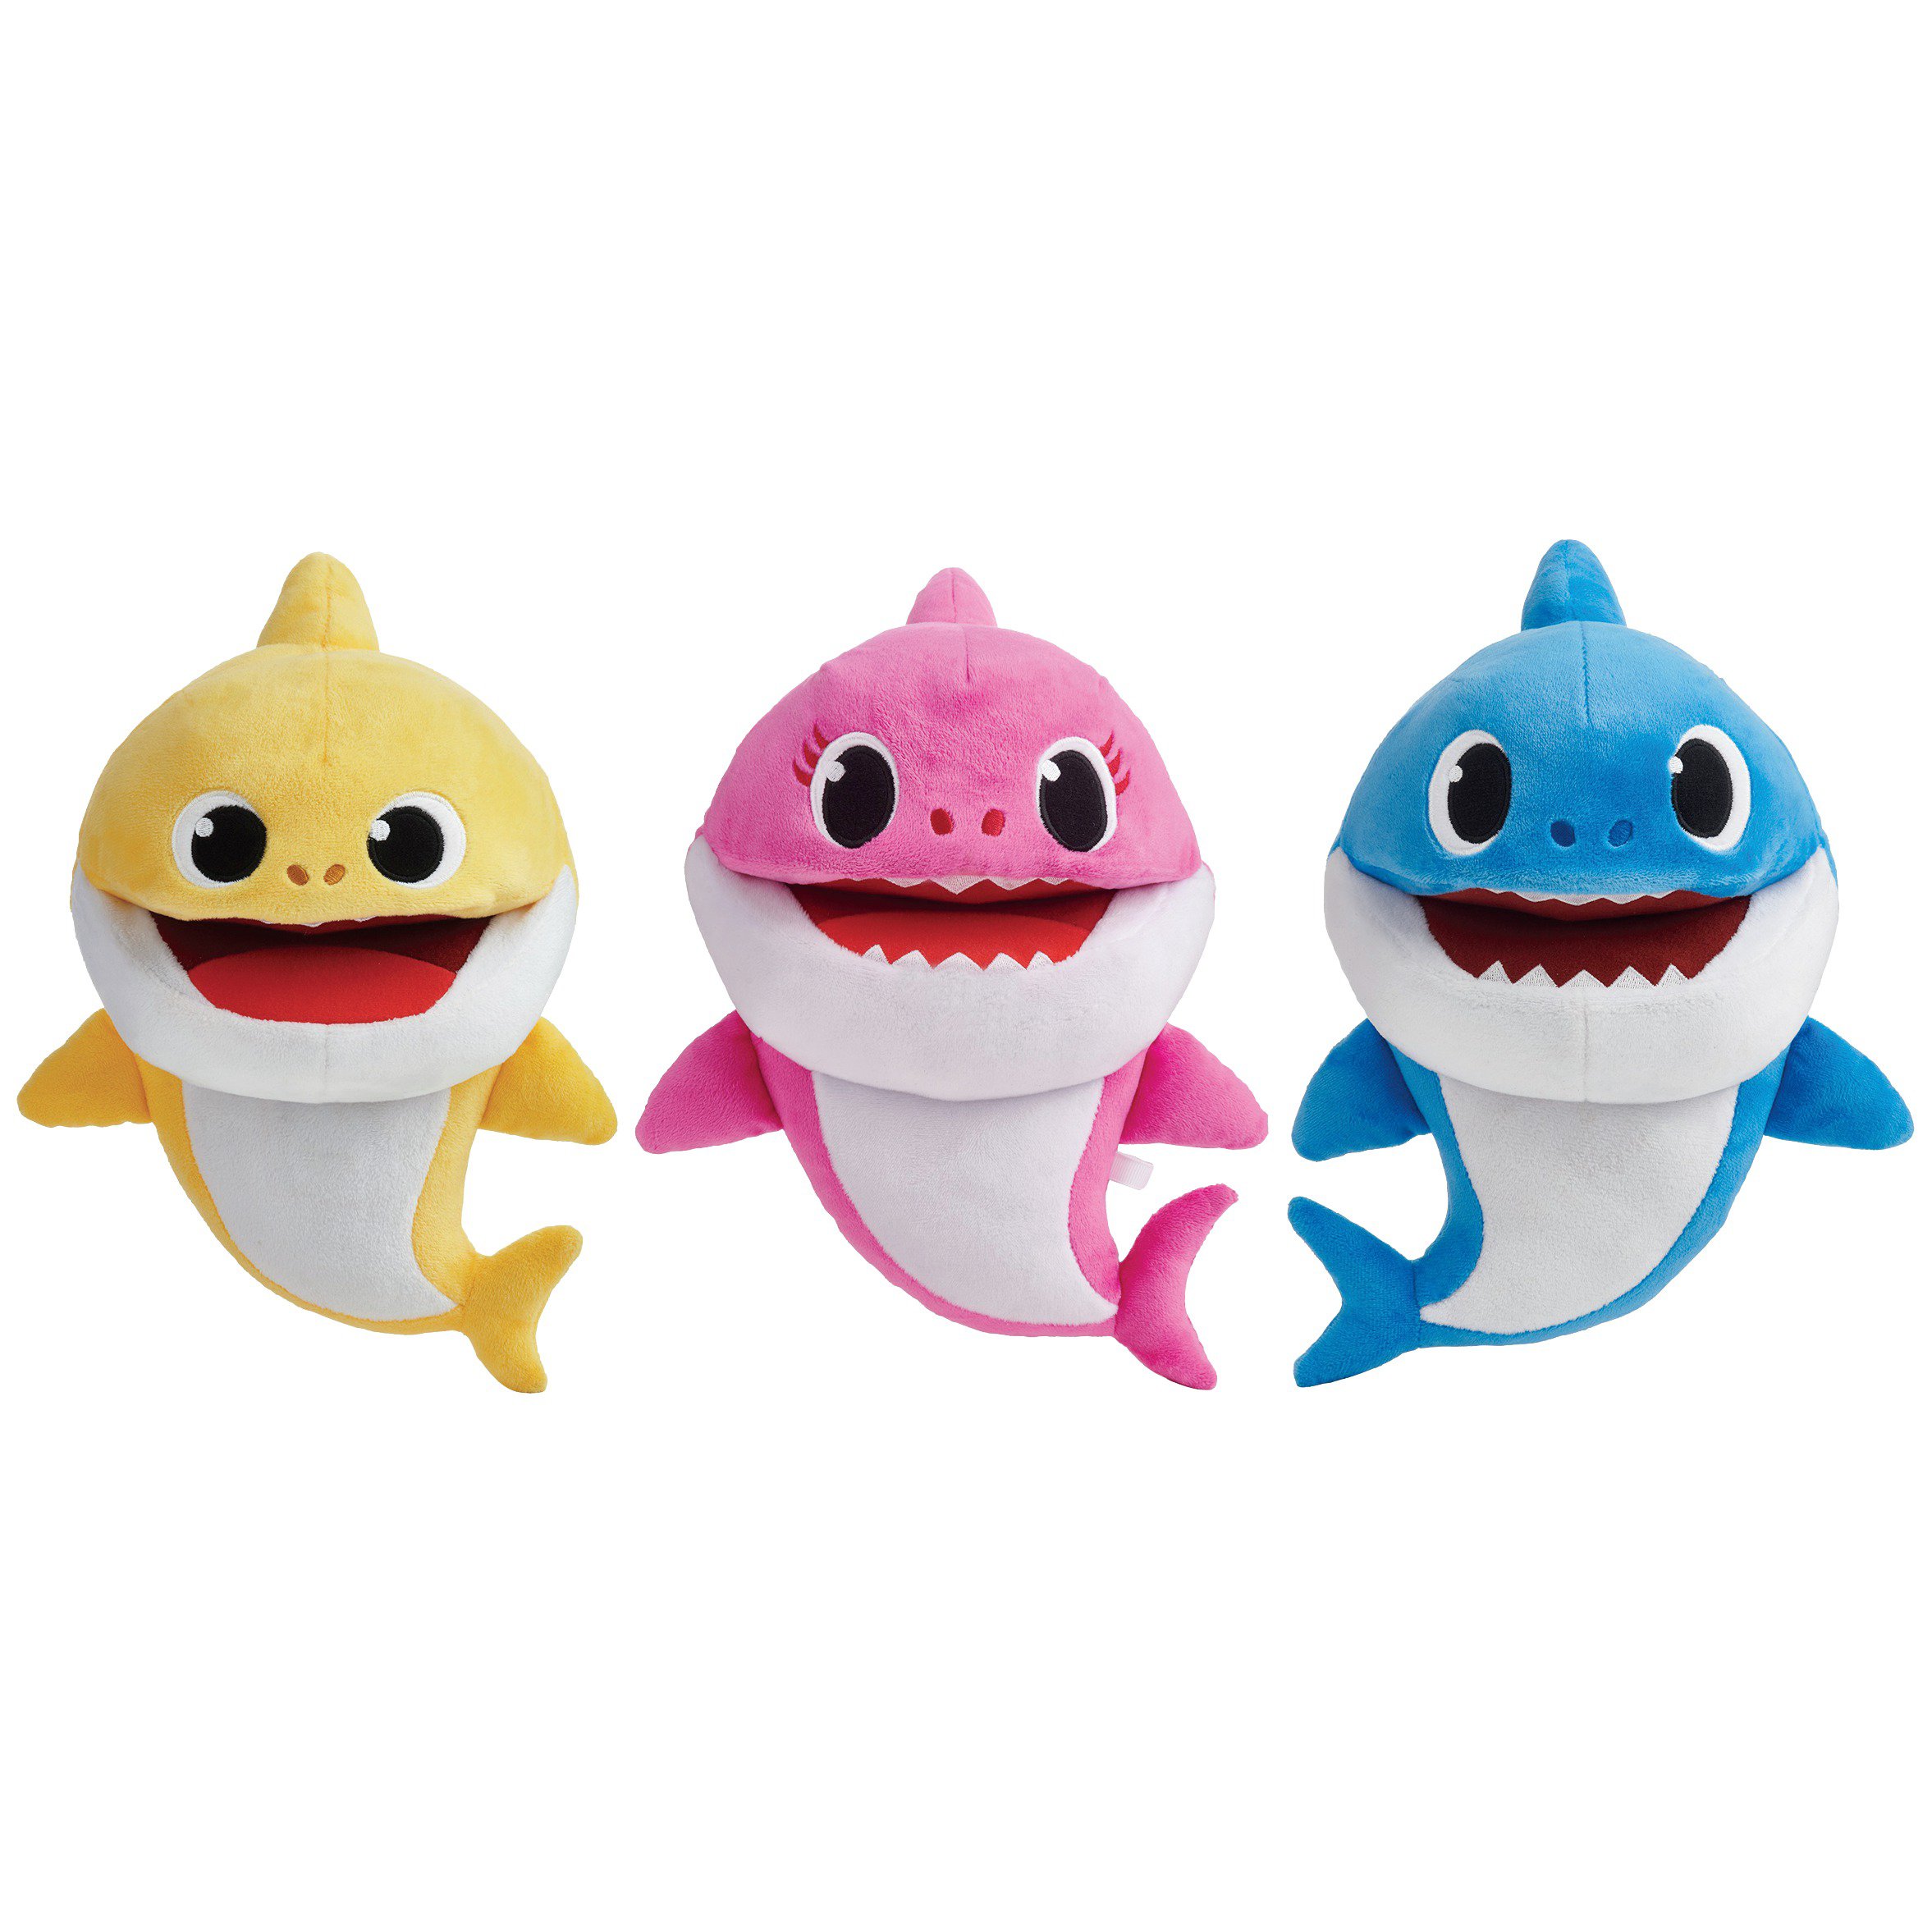 the toy shop baby shark